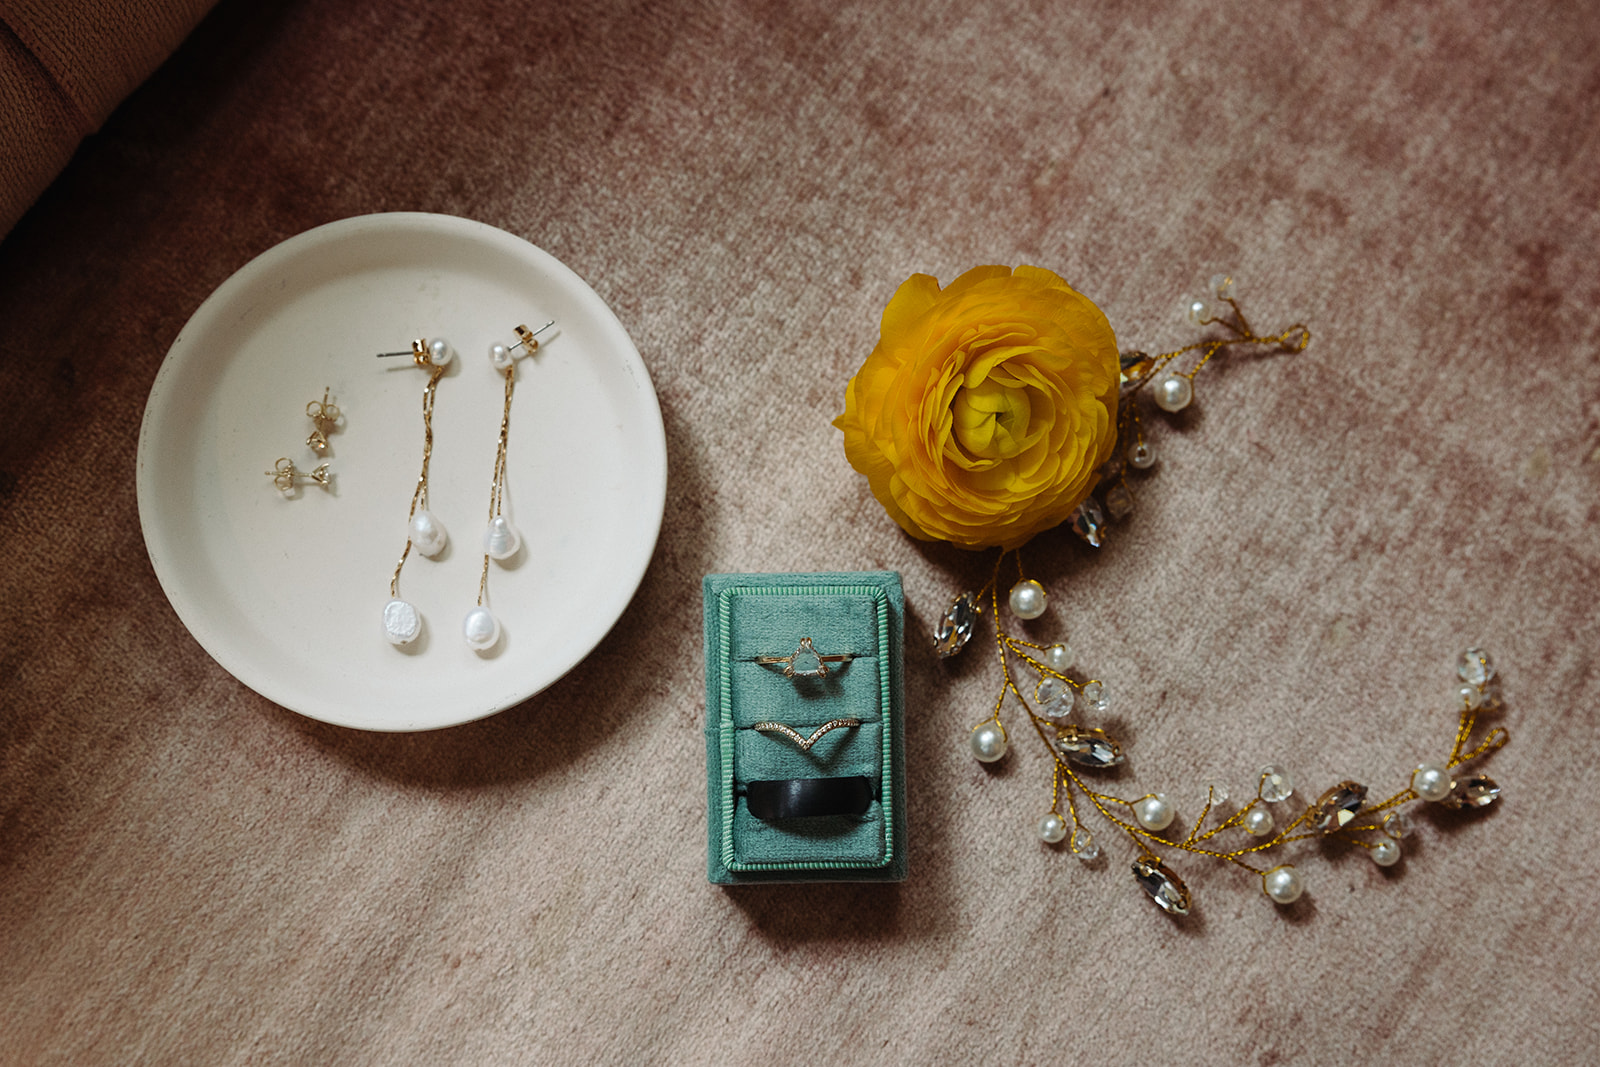 A close-up of the couple's accessories, including pearl dangling earrings, gold studs, hair brooch, and a teal ring box.